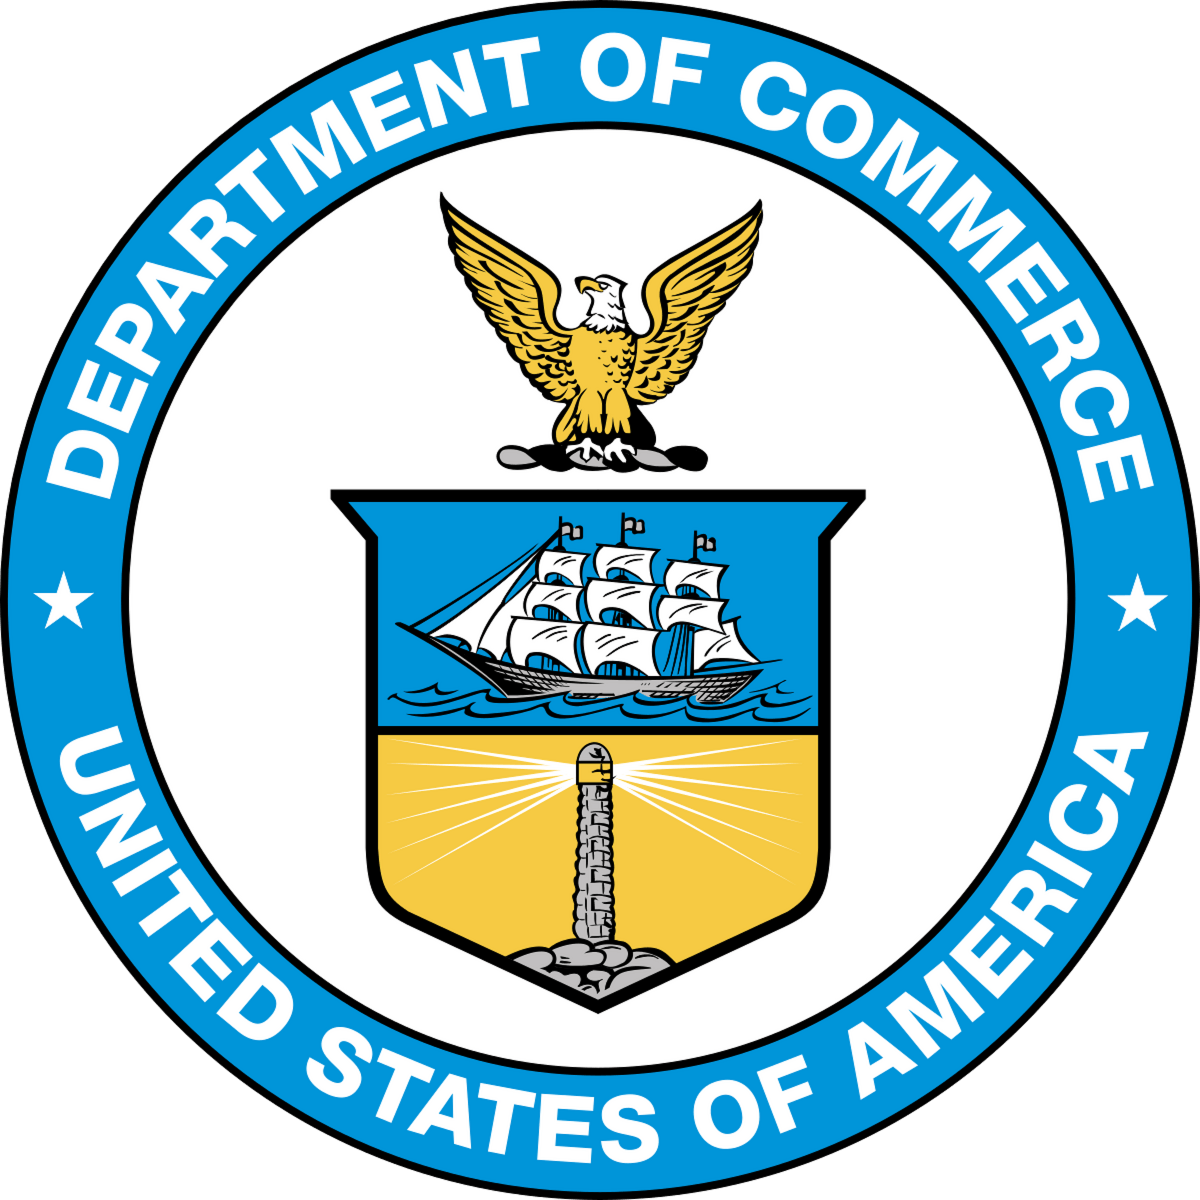 Department of Commerce, United States of America